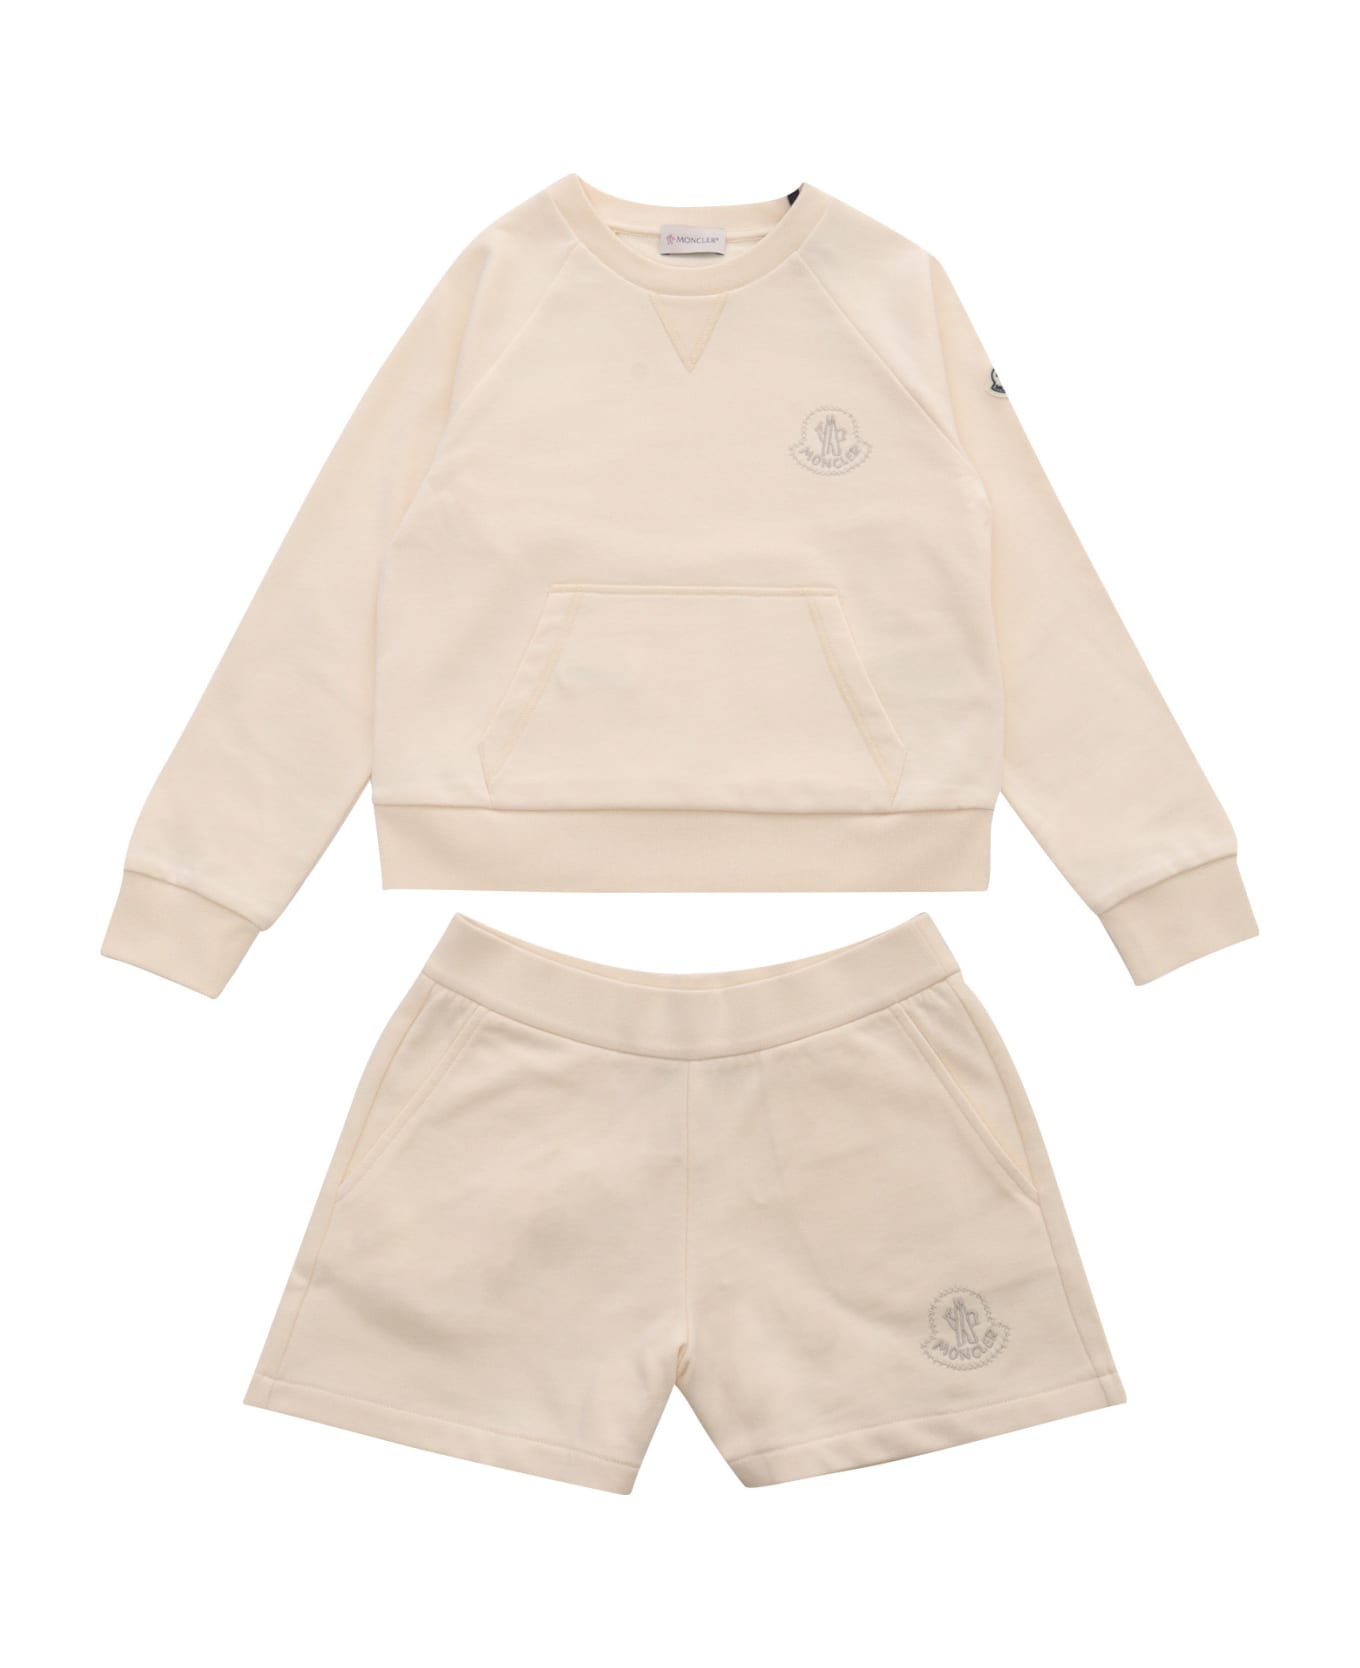 Moncler 2 Pieces Sportive Suit - CREAM ジャンプスーツ